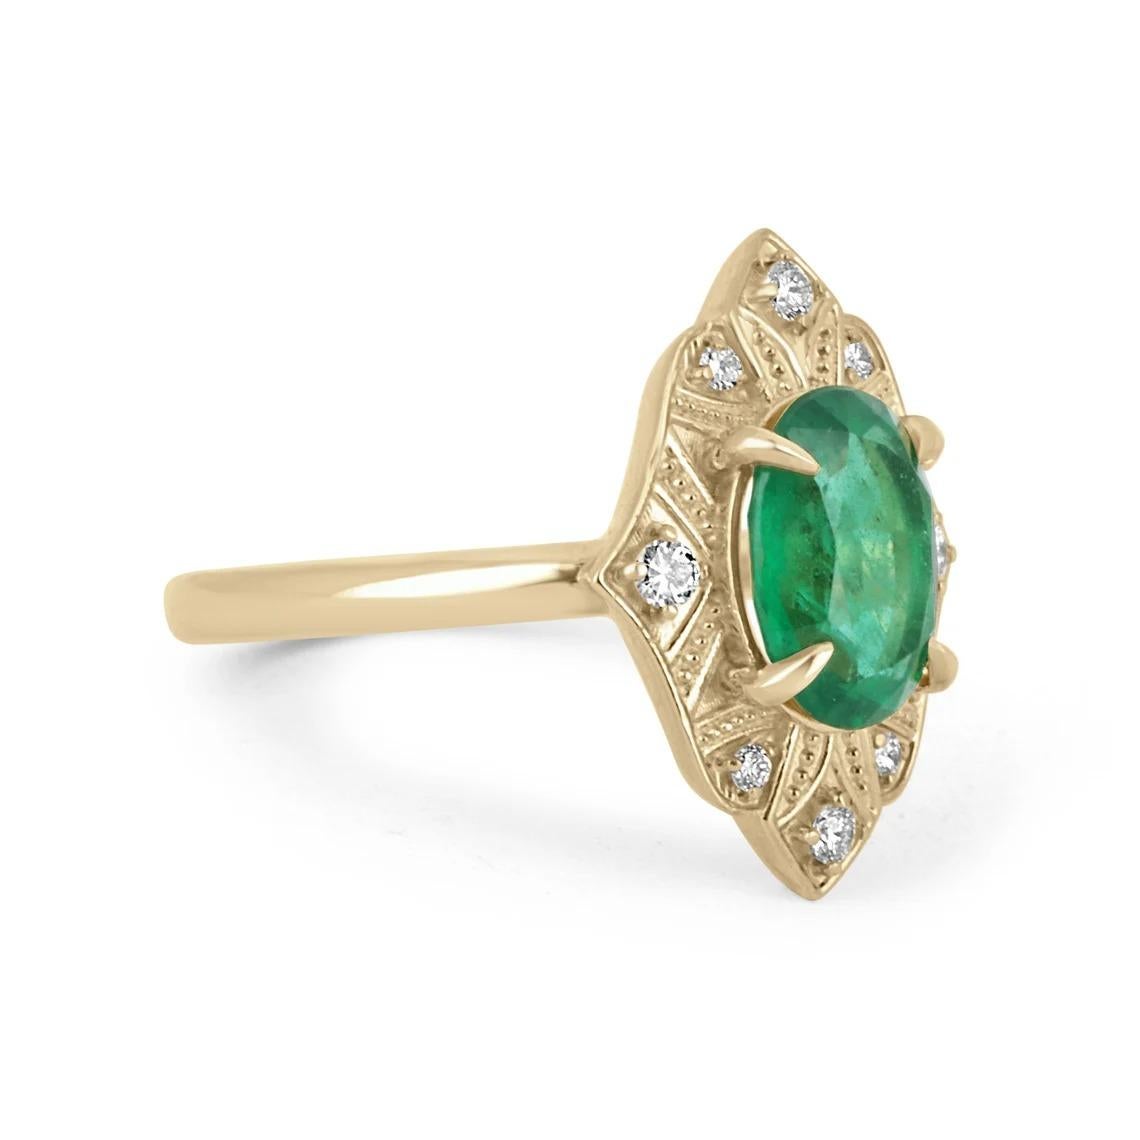 An exquisite fine quality emerald and diamond vintage ring. The center gemstone features a ravishing 1.86-carat, oval-cut Zambian emerald. The gemstone displays a rich and lustrous green color, very good clarity, and minimal internal imperfections.